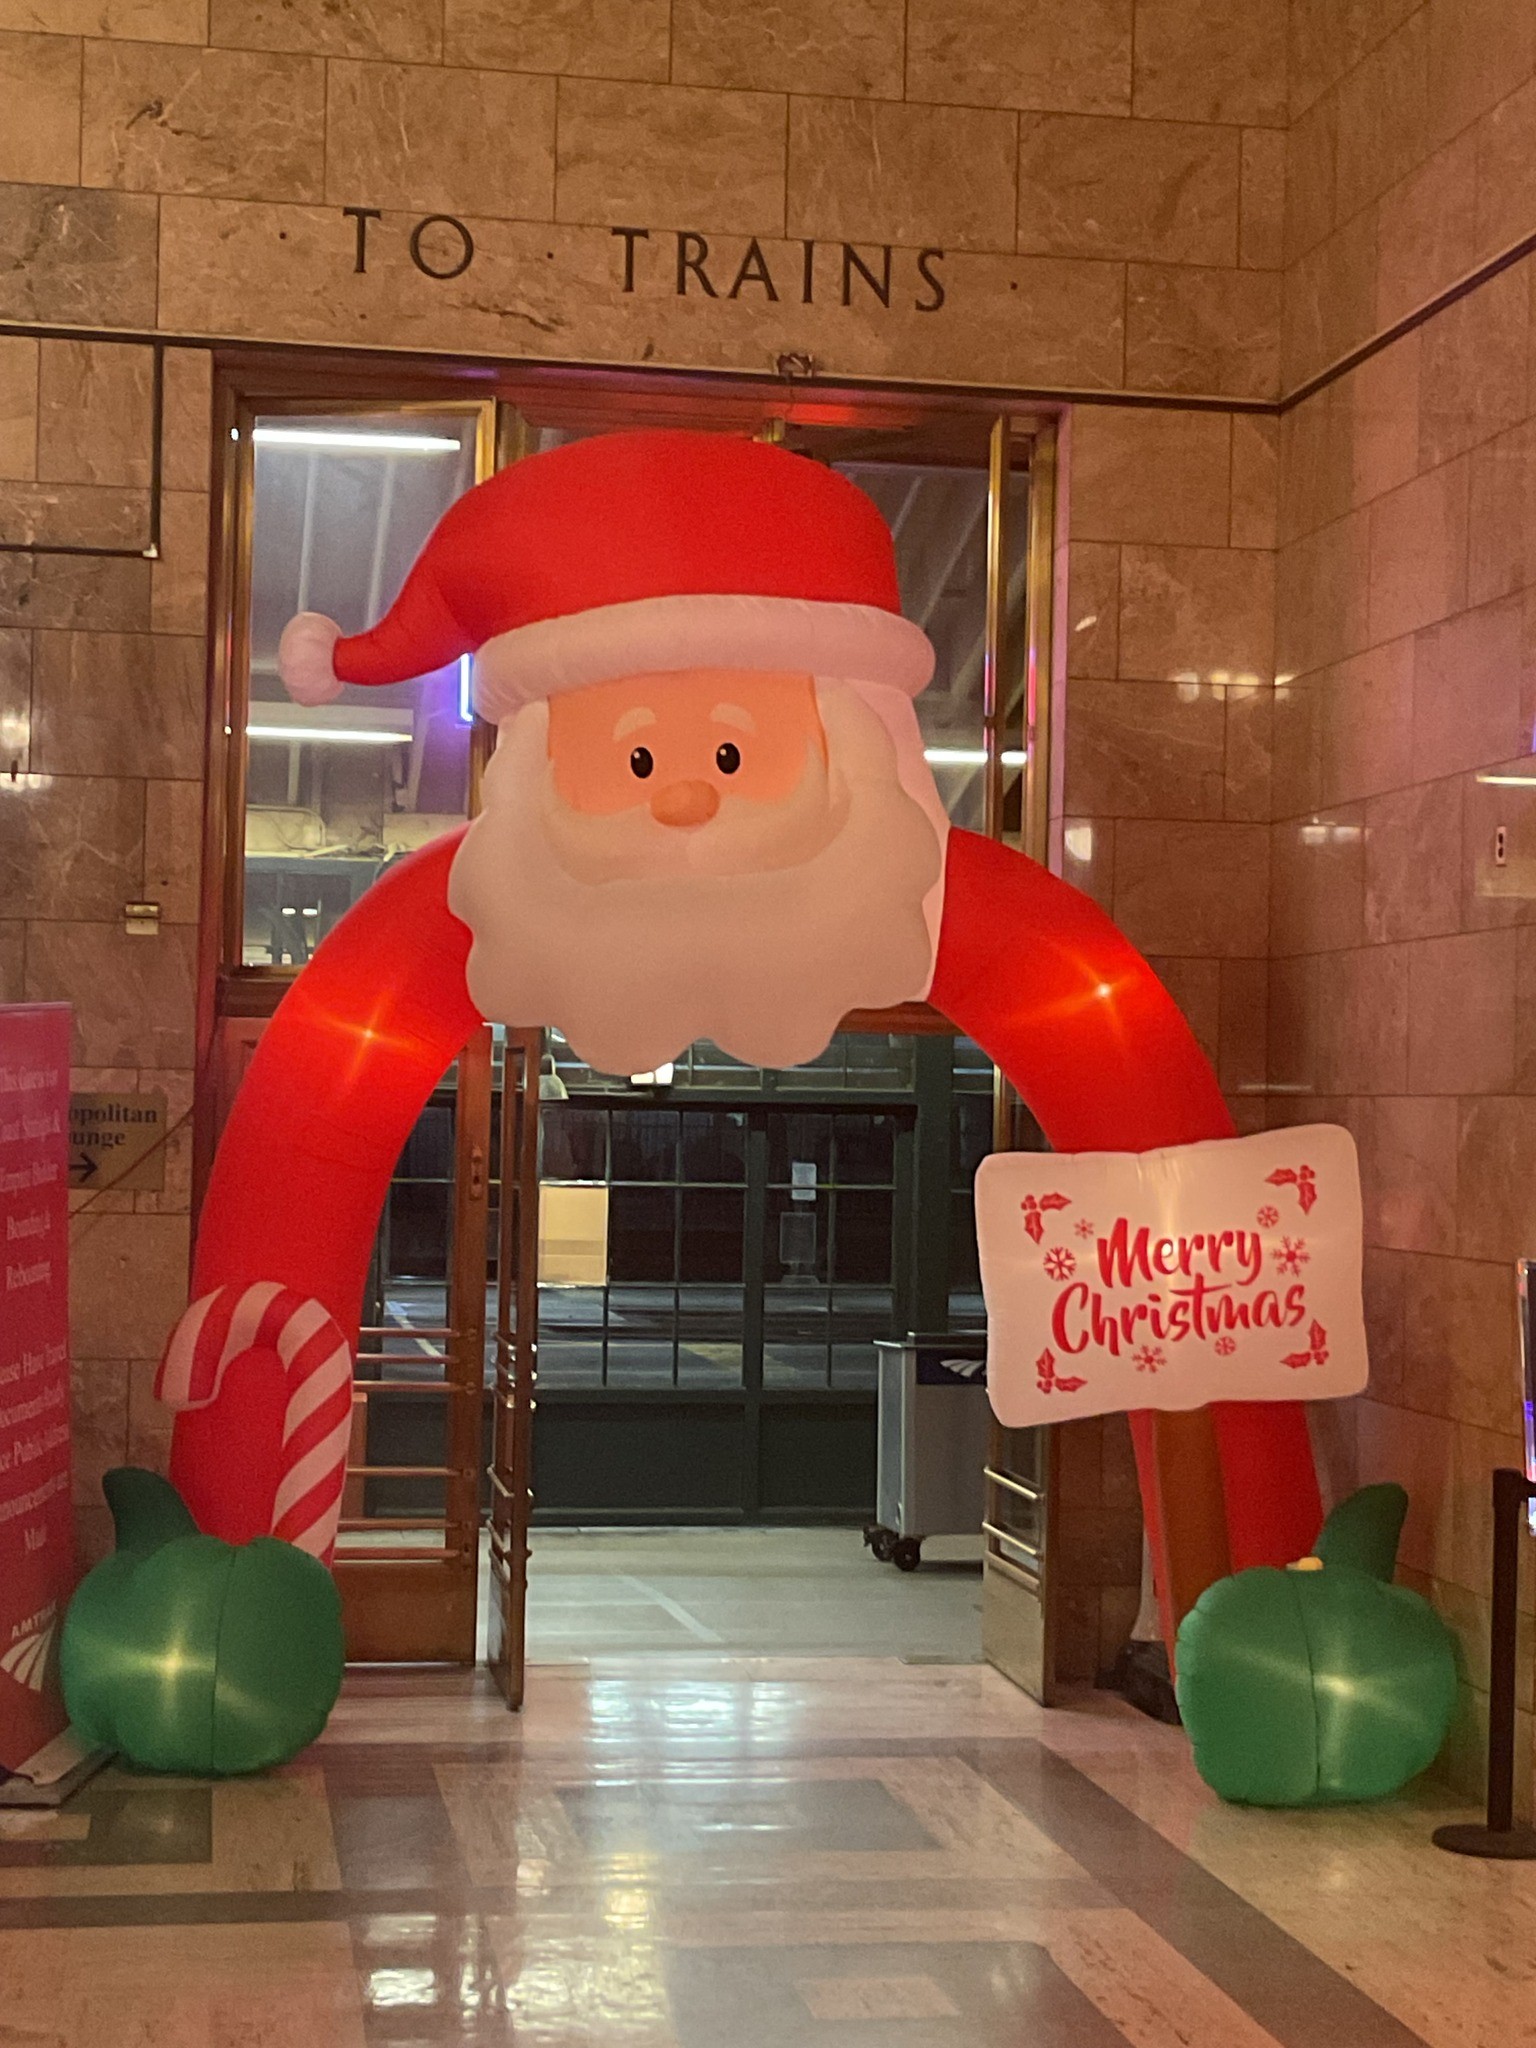 Santa at exit to trains, Portland (OR) Union Station.